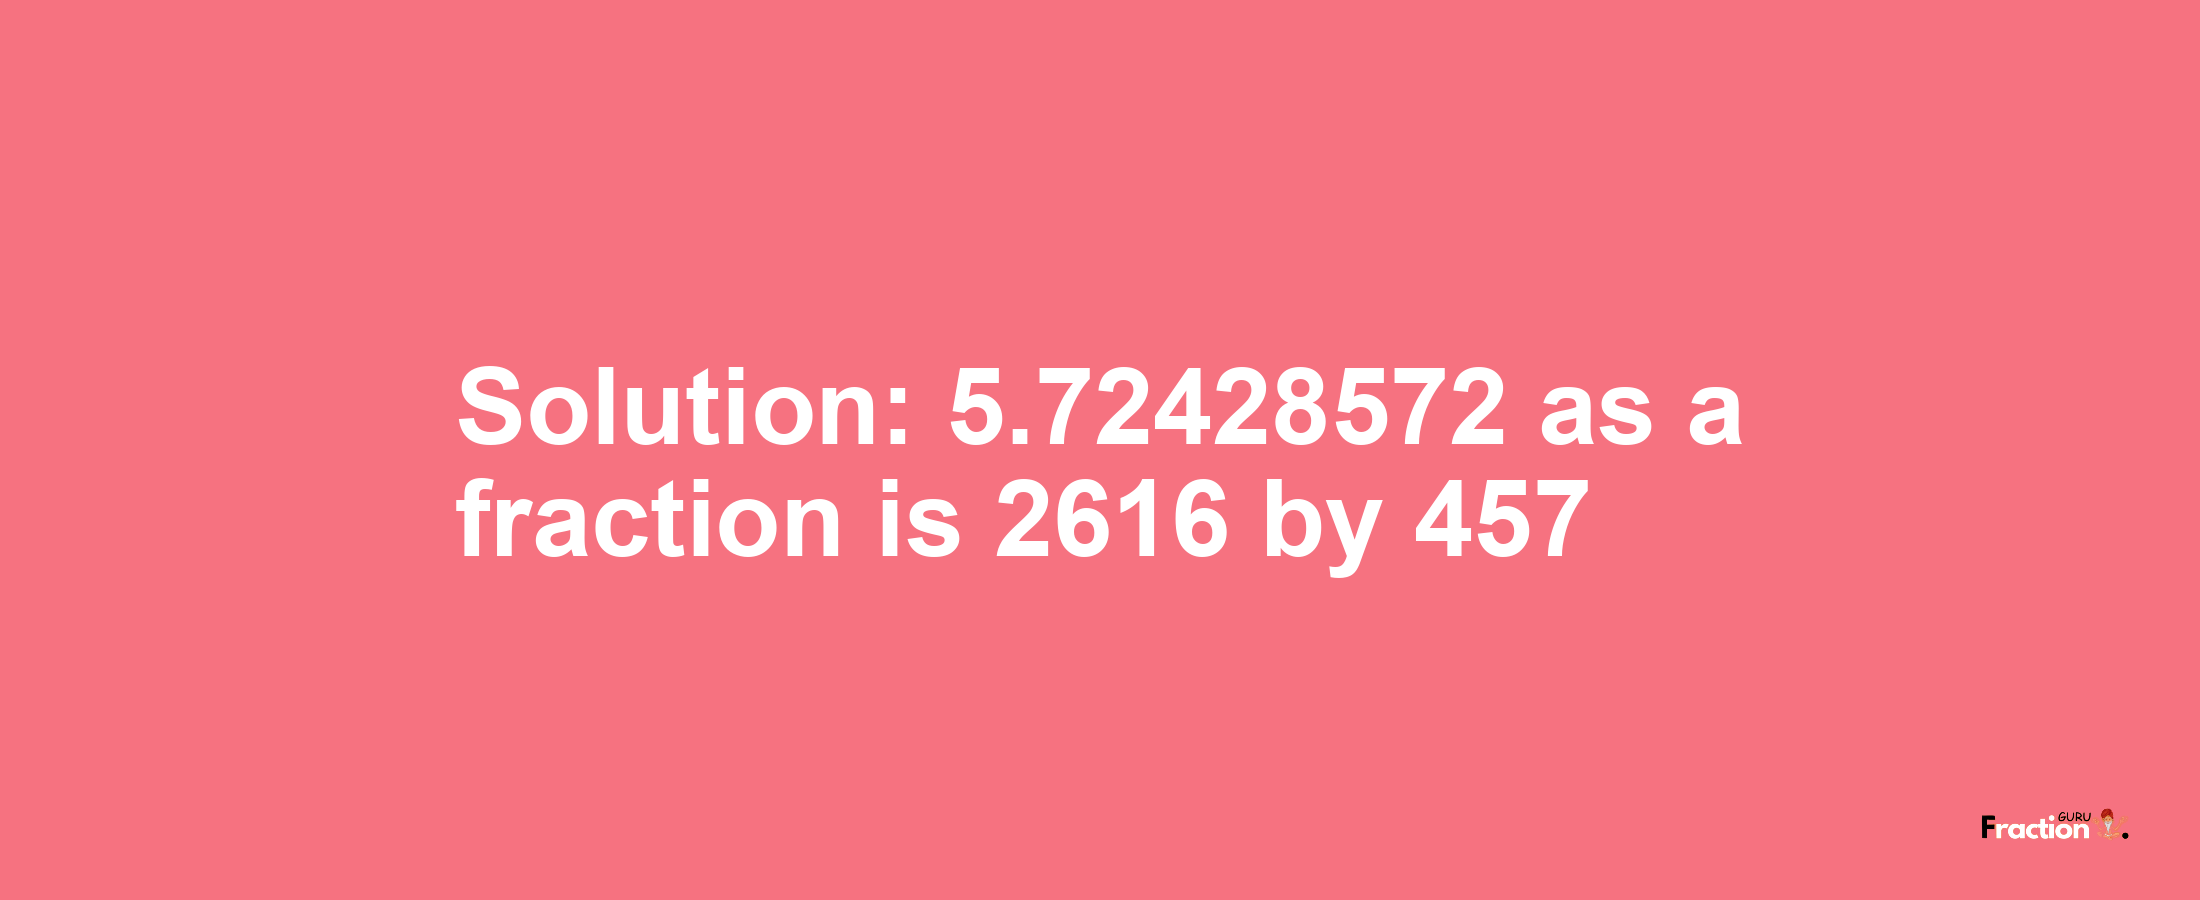 Solution:5.72428572 as a fraction is 2616/457